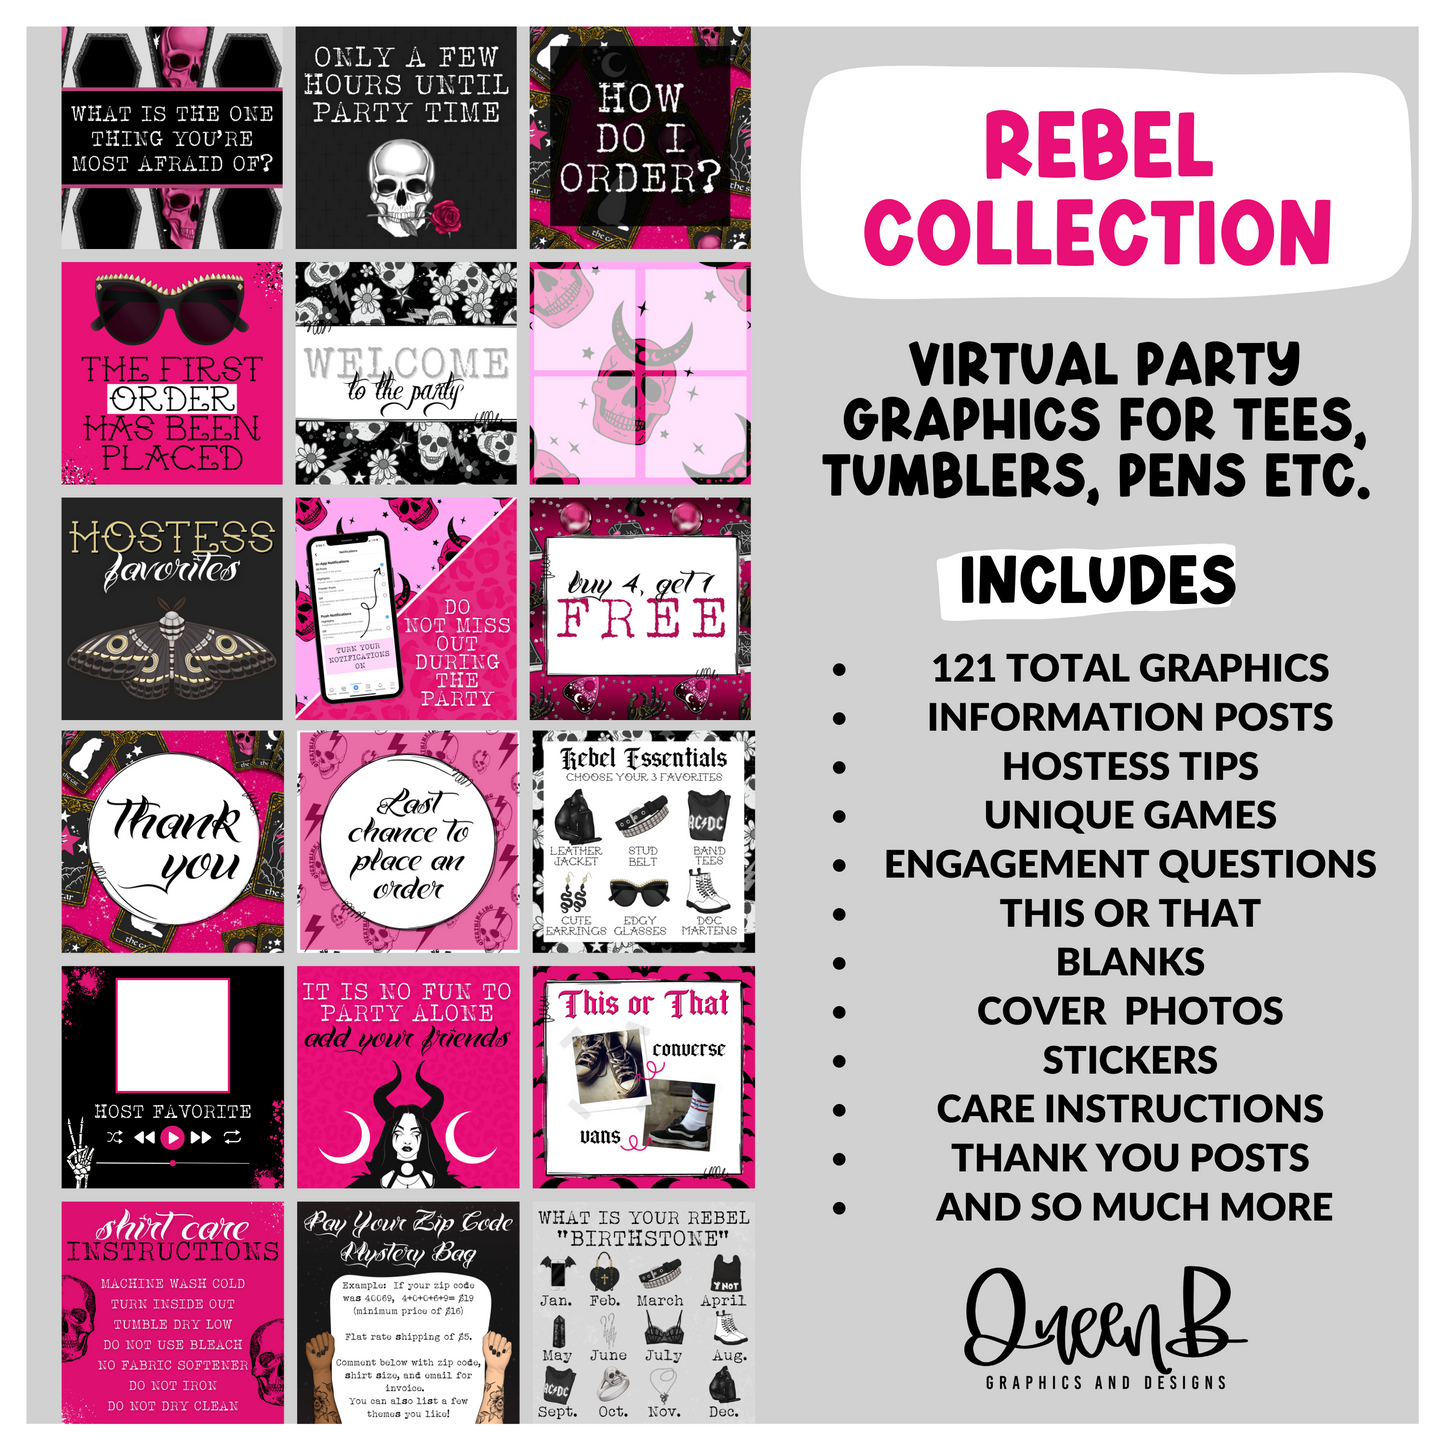 Rebel Tee Party & Basic Party Graphics Collection